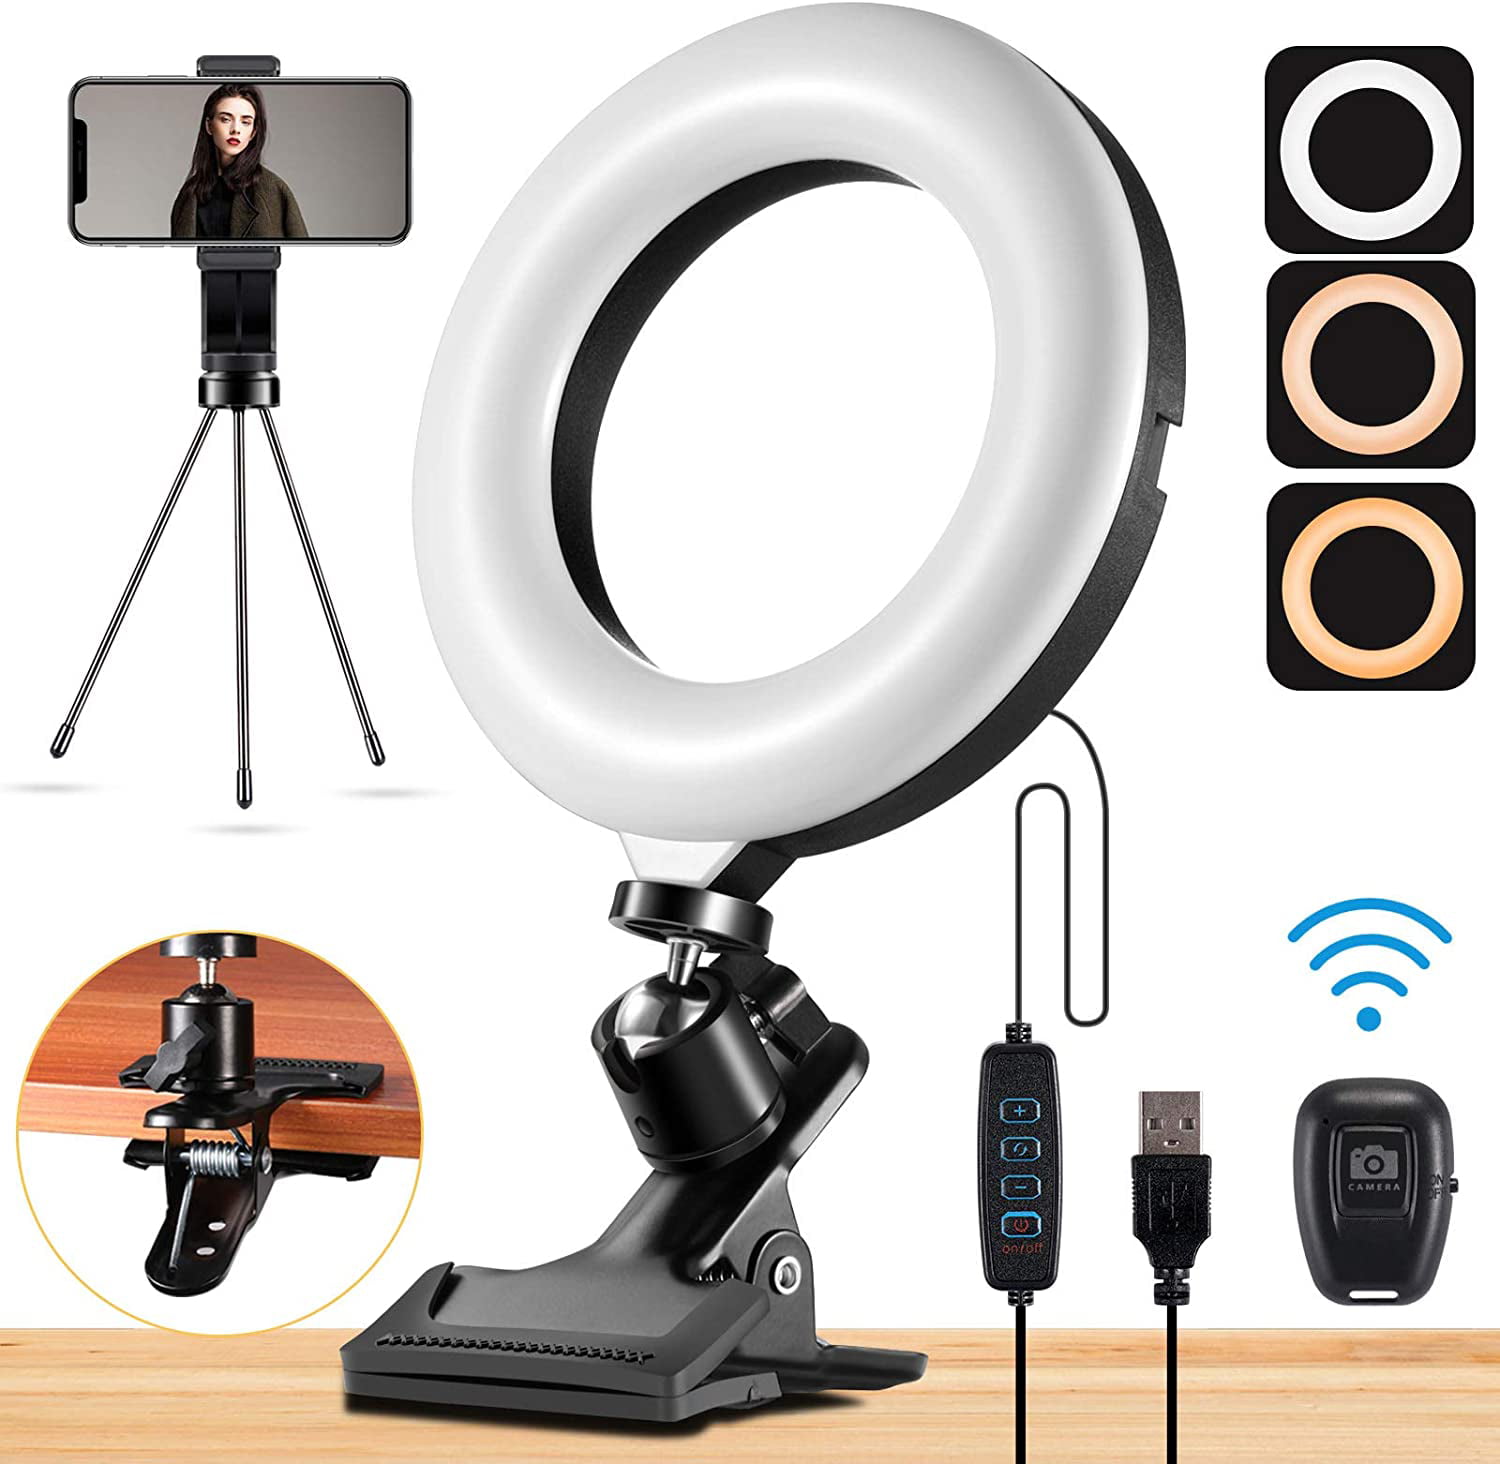 6.3 Selfie Ring Light with Clamp Mount for Video Conferencing 3200k-6500K Dimmable Led Ring Lights Clip on Laptop Monitor for Remote Working/Zoom Calls/Live Streaming Video Conference Lighting Kit 